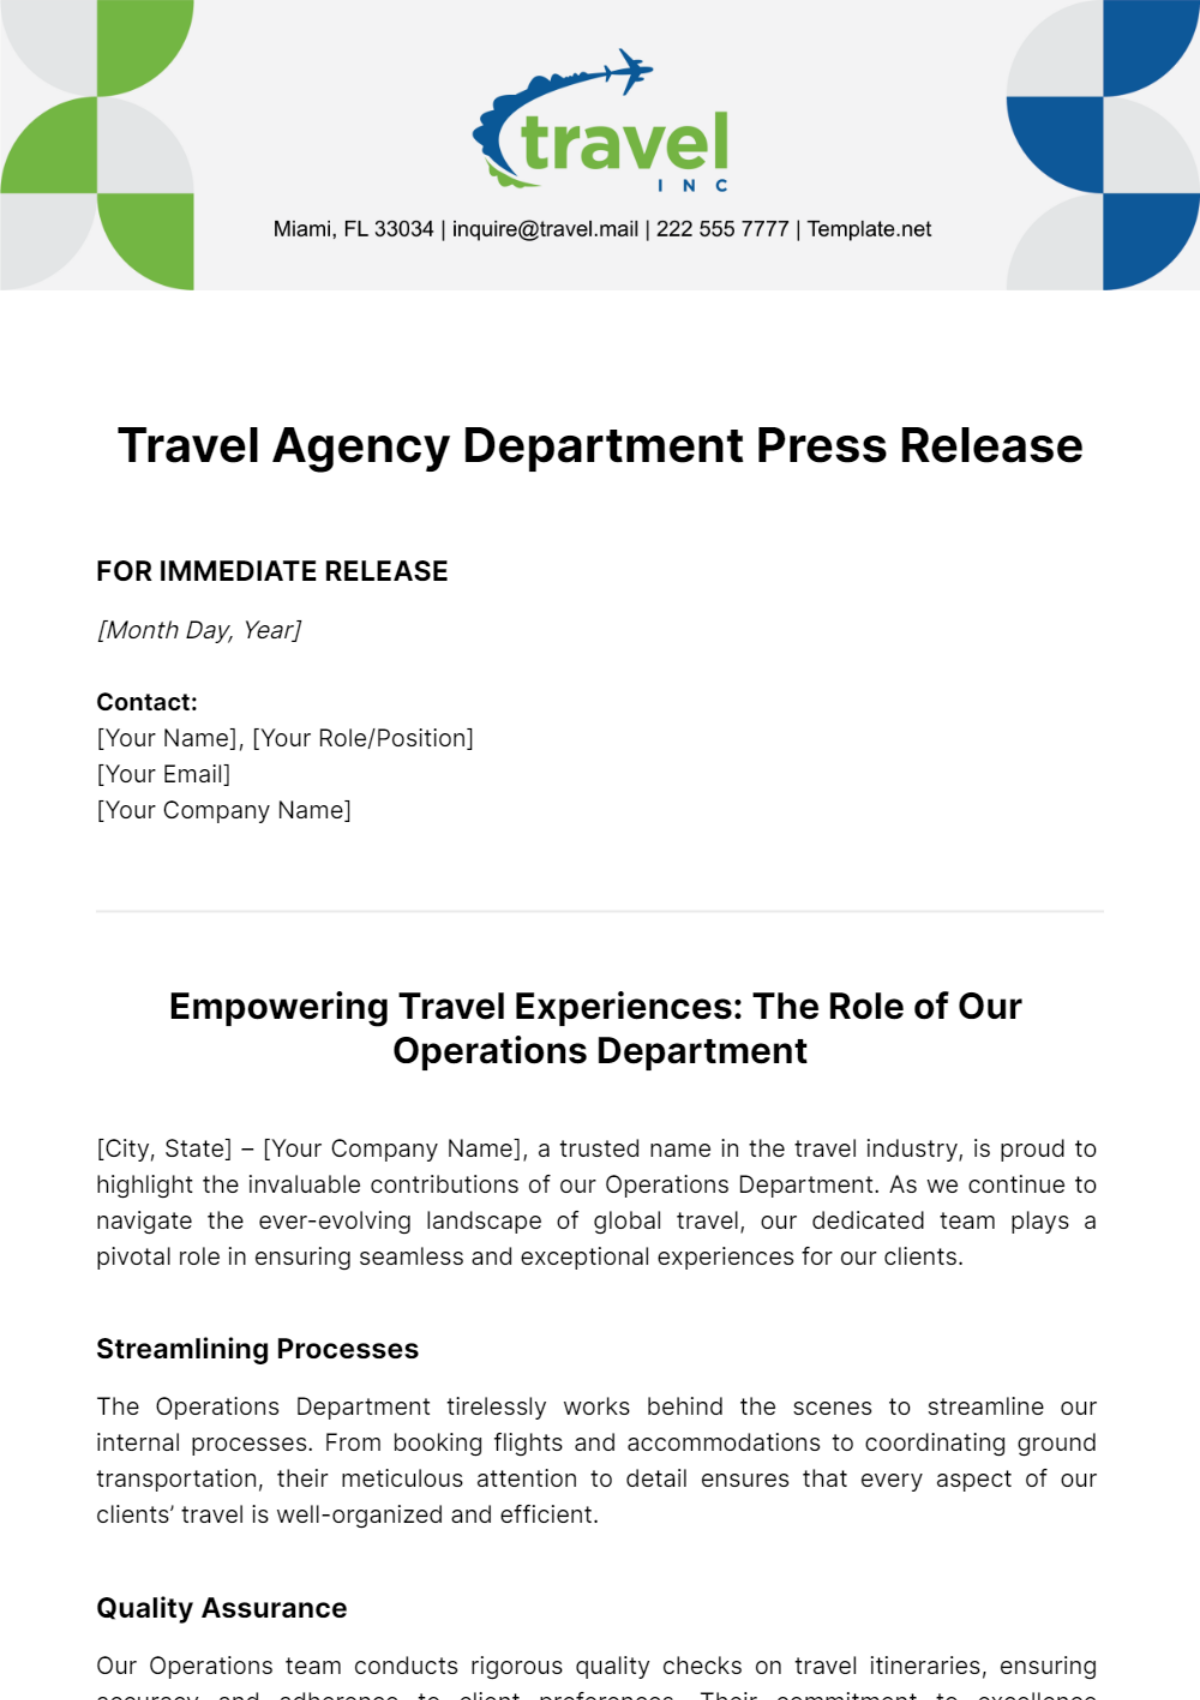 Travel Agency Department Press Release Template